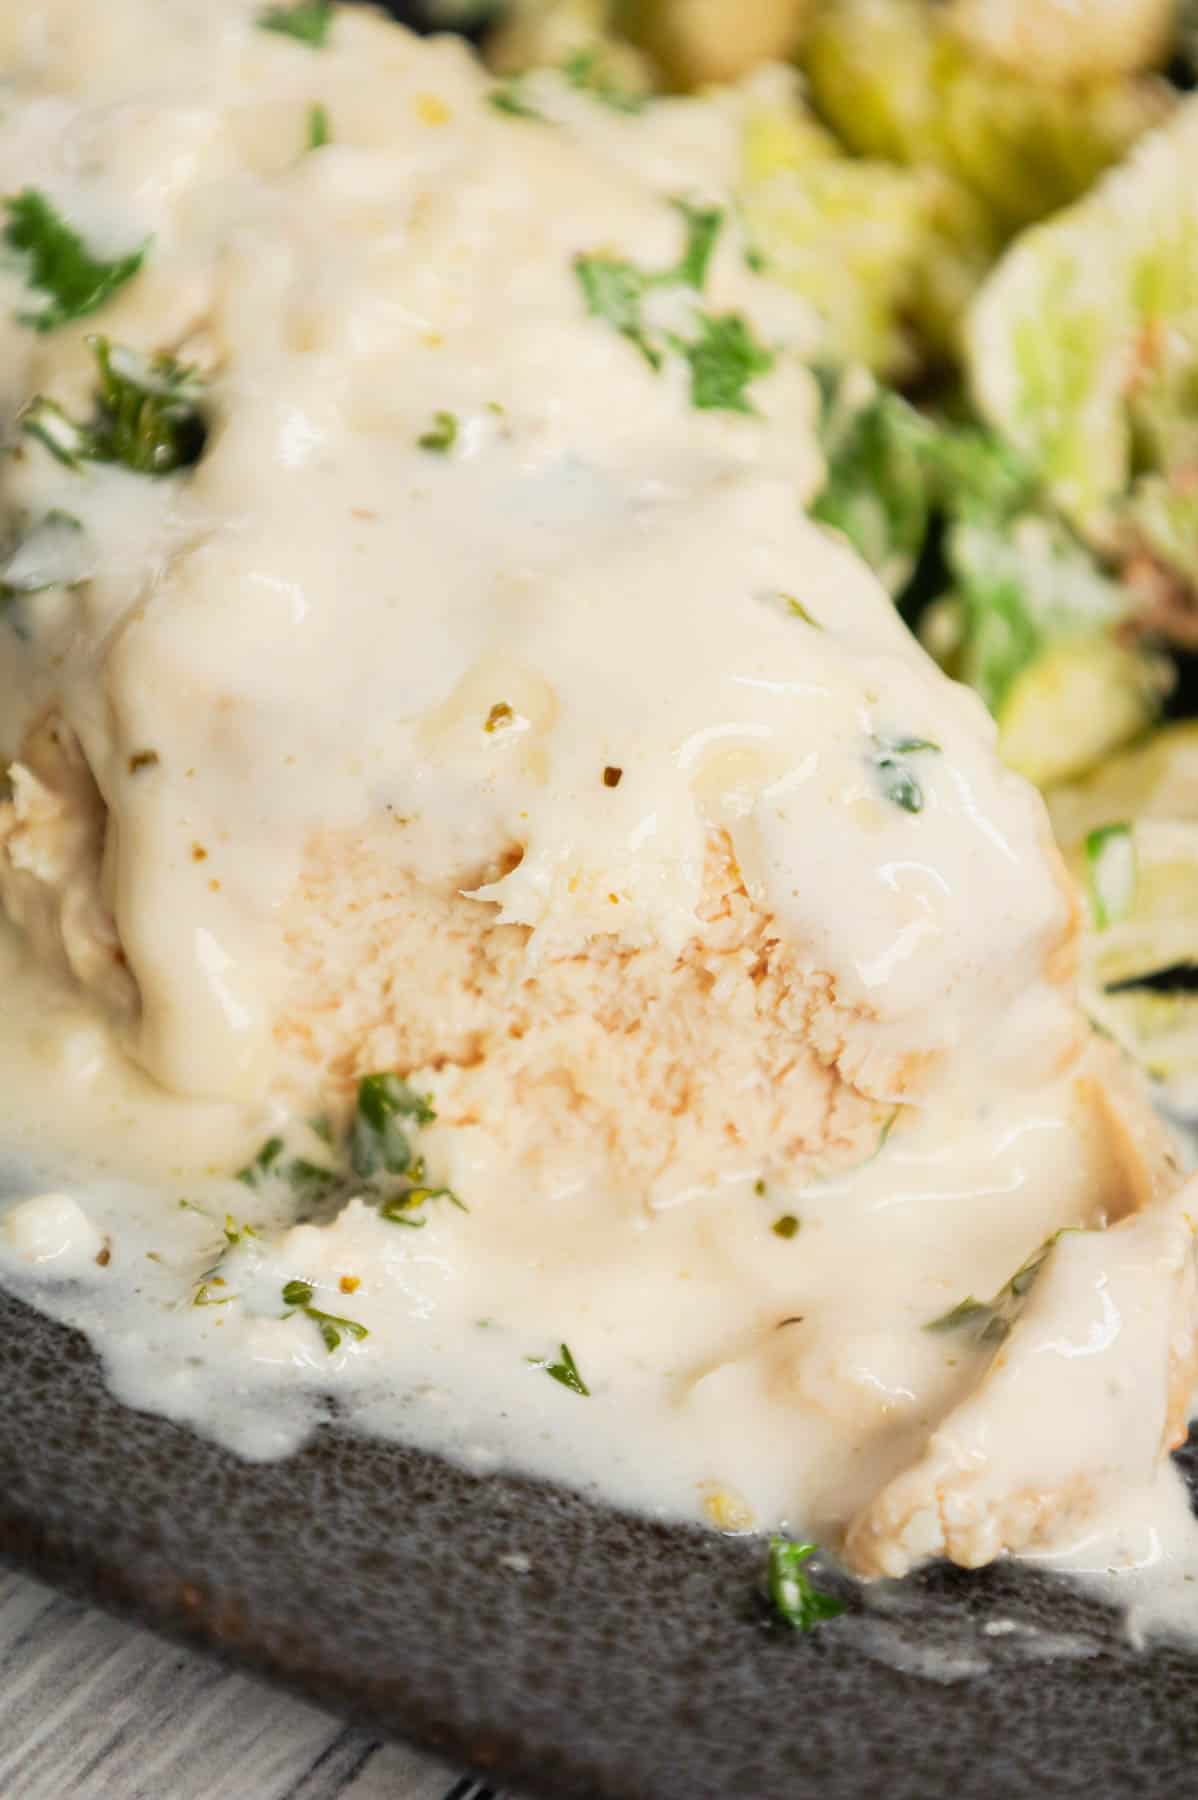 Crock Pot Parmesan Garlic Chicken is a rich and delicious slow cooker dish made with boneless, skinless chicken breasts in a creamy sauce loaded with minced garlic, parmesan cheese, Italian seasoning, fresh chopped parsley, cream cheese and mozzarella cheese.